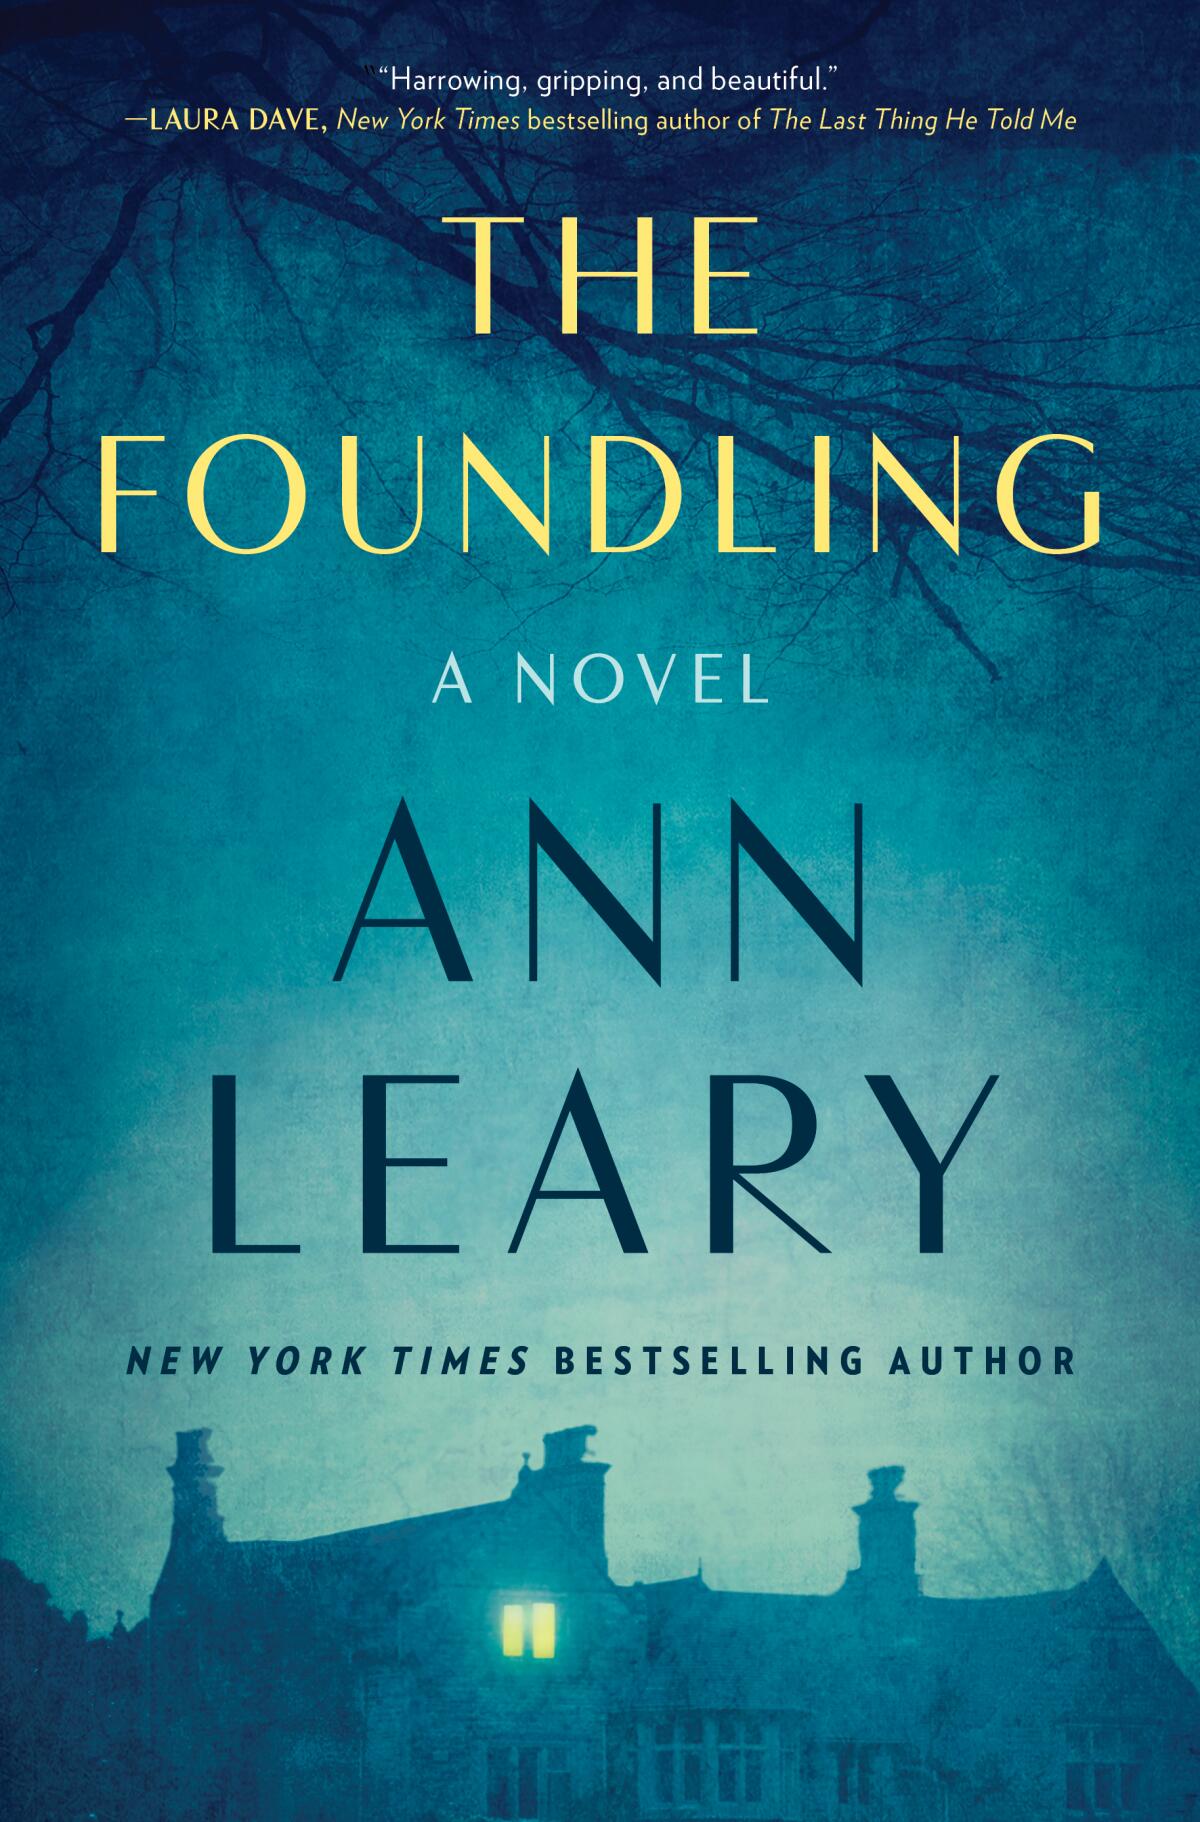 "The Foundling," by Ann Leary